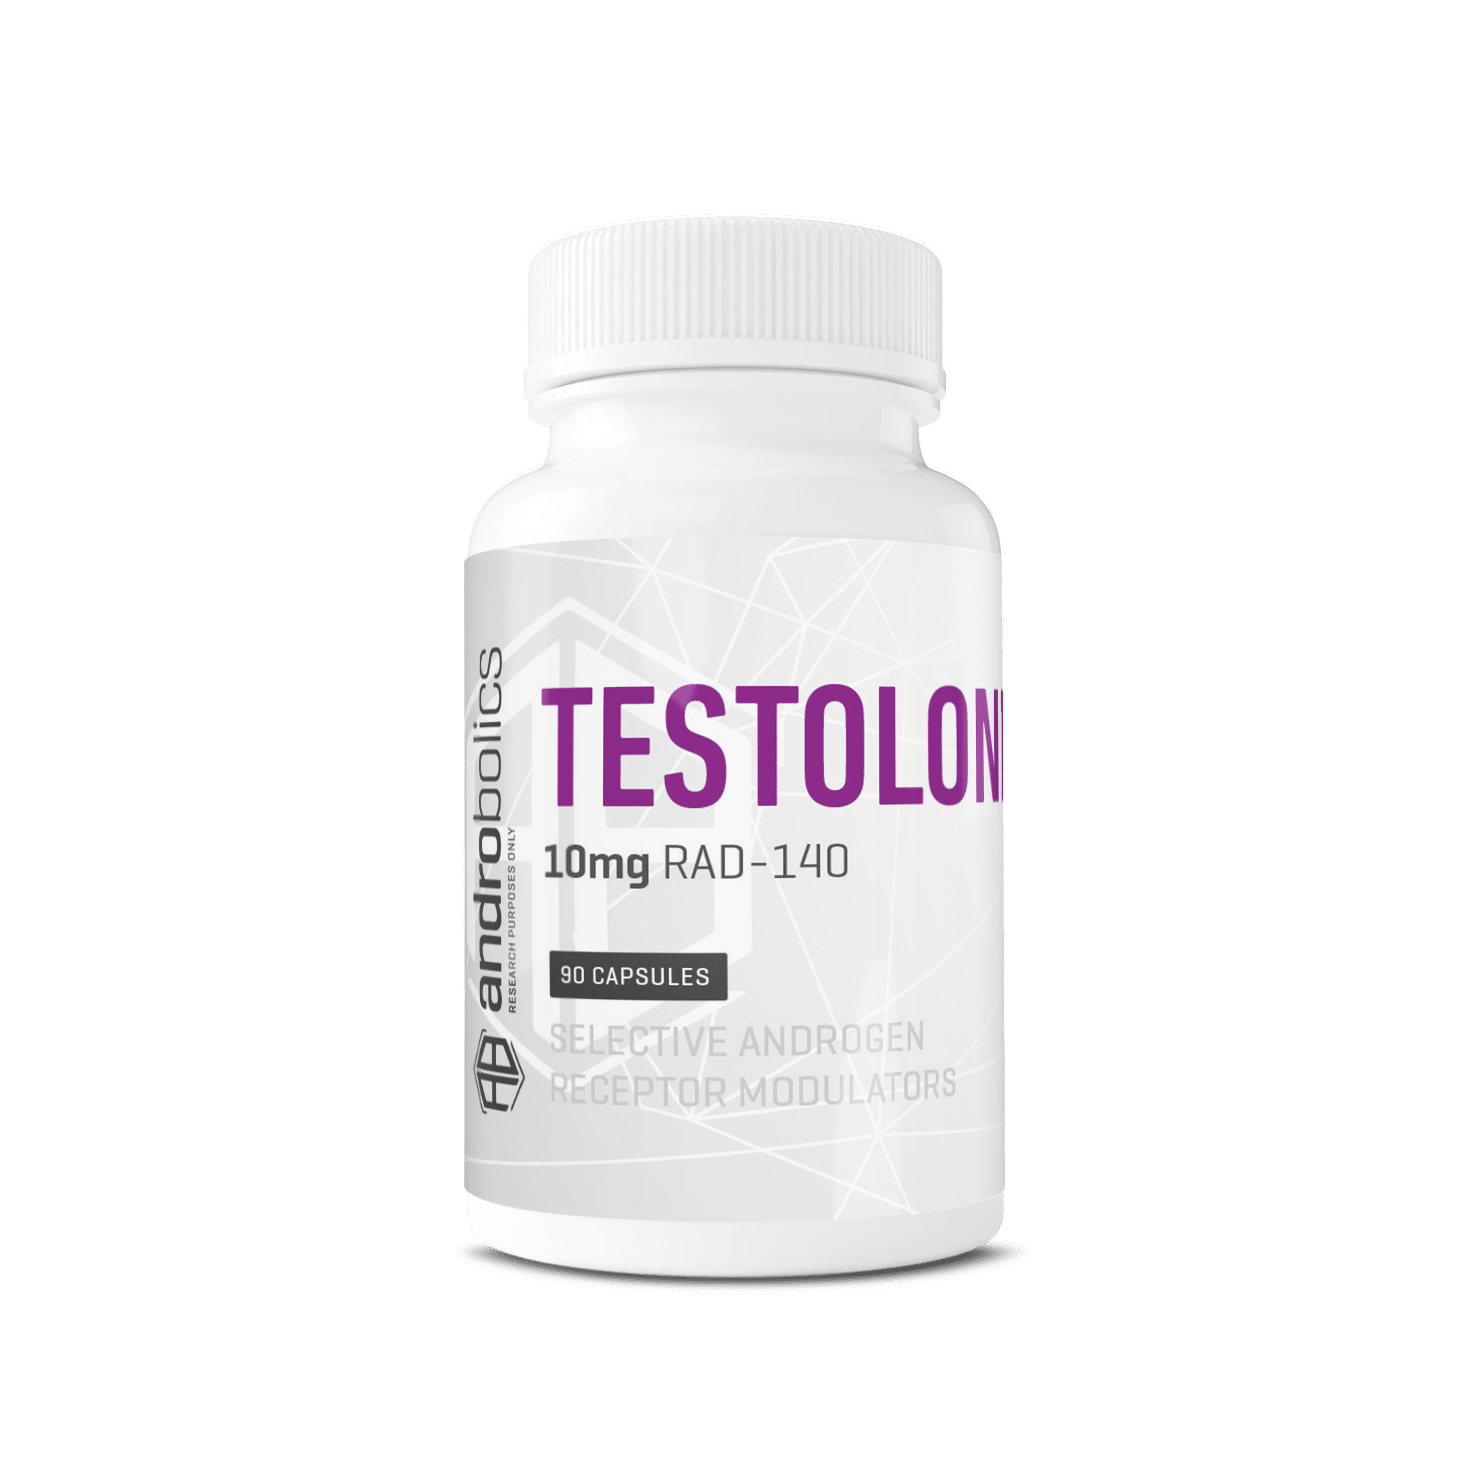 Testolone RAD140 SARMs - 90 Capsules of 10mg for Improved Muscle Growth and Strength